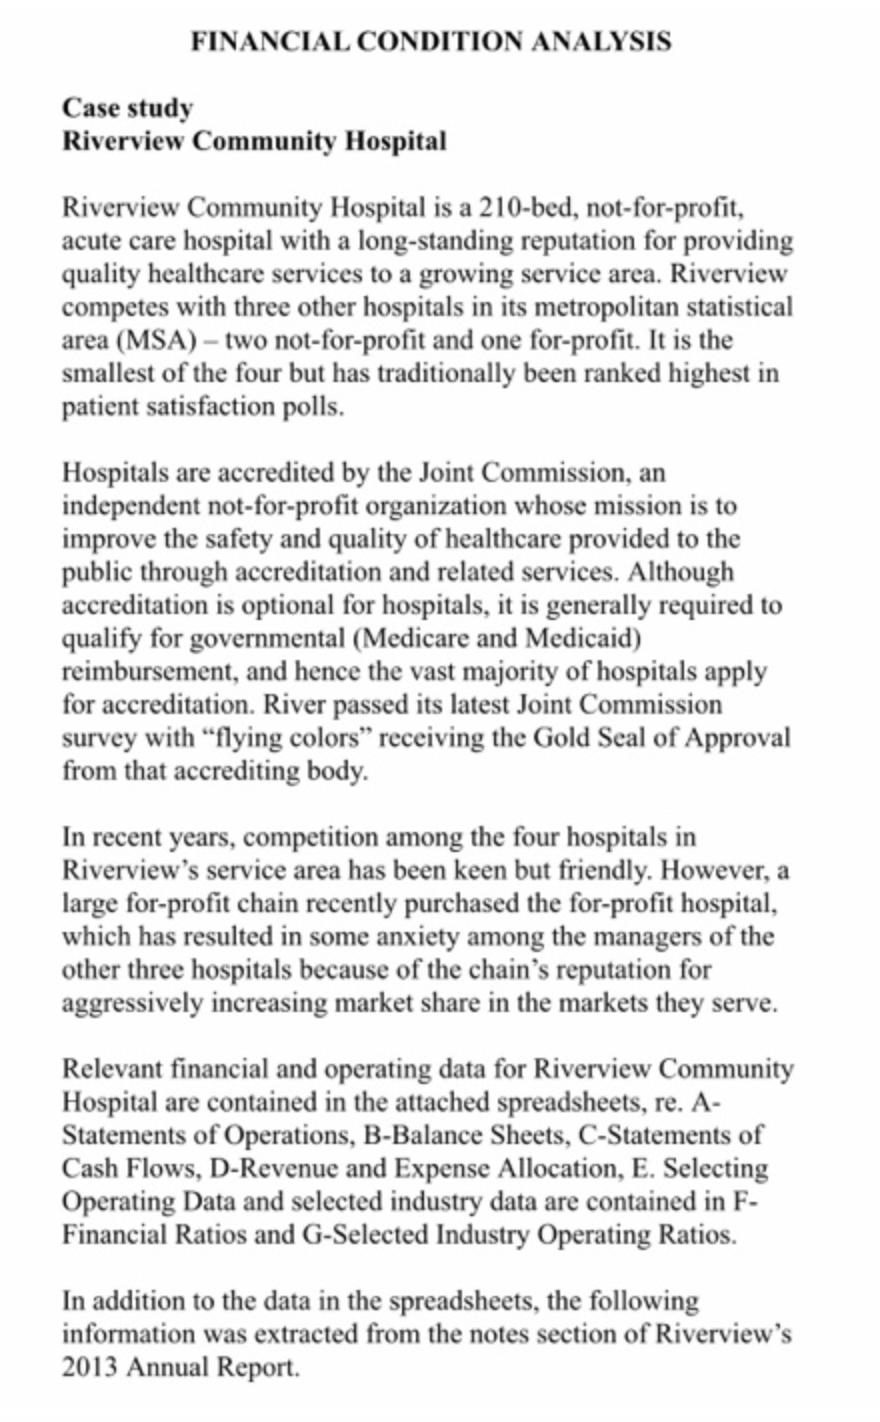 FINANCIAL CONDITION ANALYSIS Case study Riverview Community Hospital Riverview Community Hospital is a 210-bed, not-for-profi